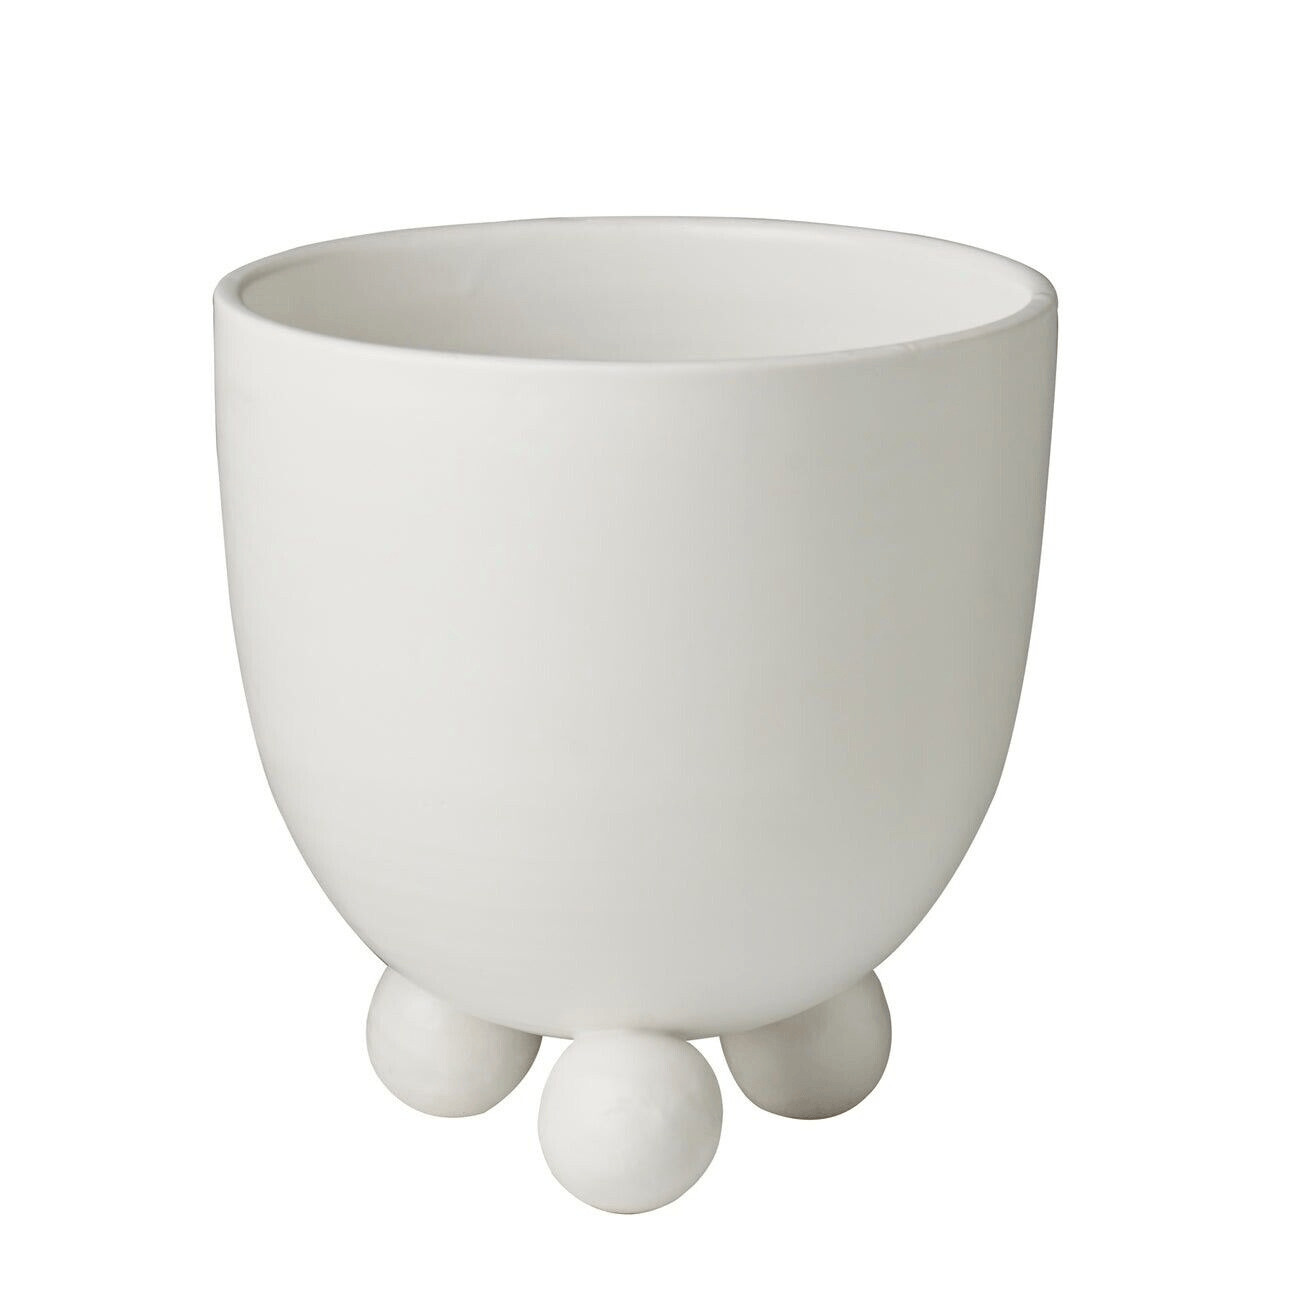 abigails italy pottery | Catalina Footed Cachepot Planter, Matte White